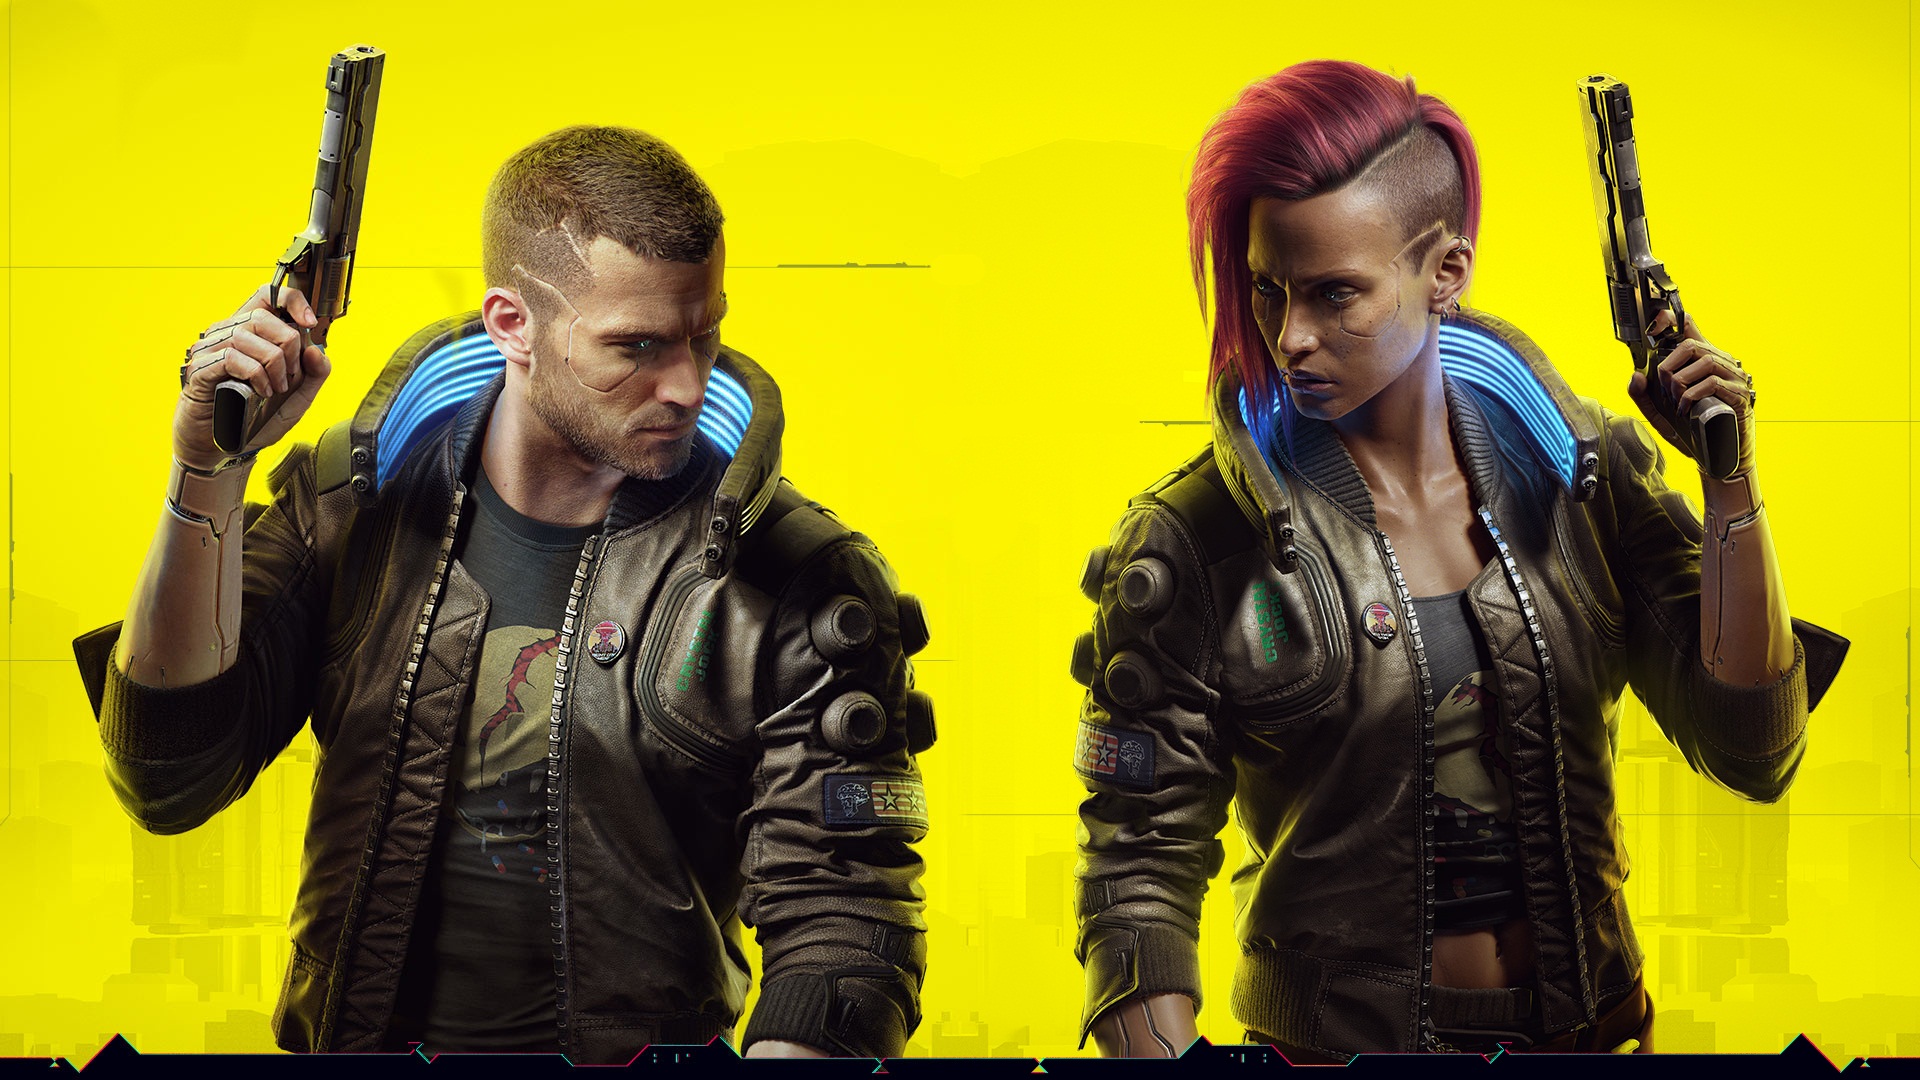 Update: Cyberpunk 2077 Adds New Perks, Playstyles And The Ability To Change Your Character’s Clothing In Preview